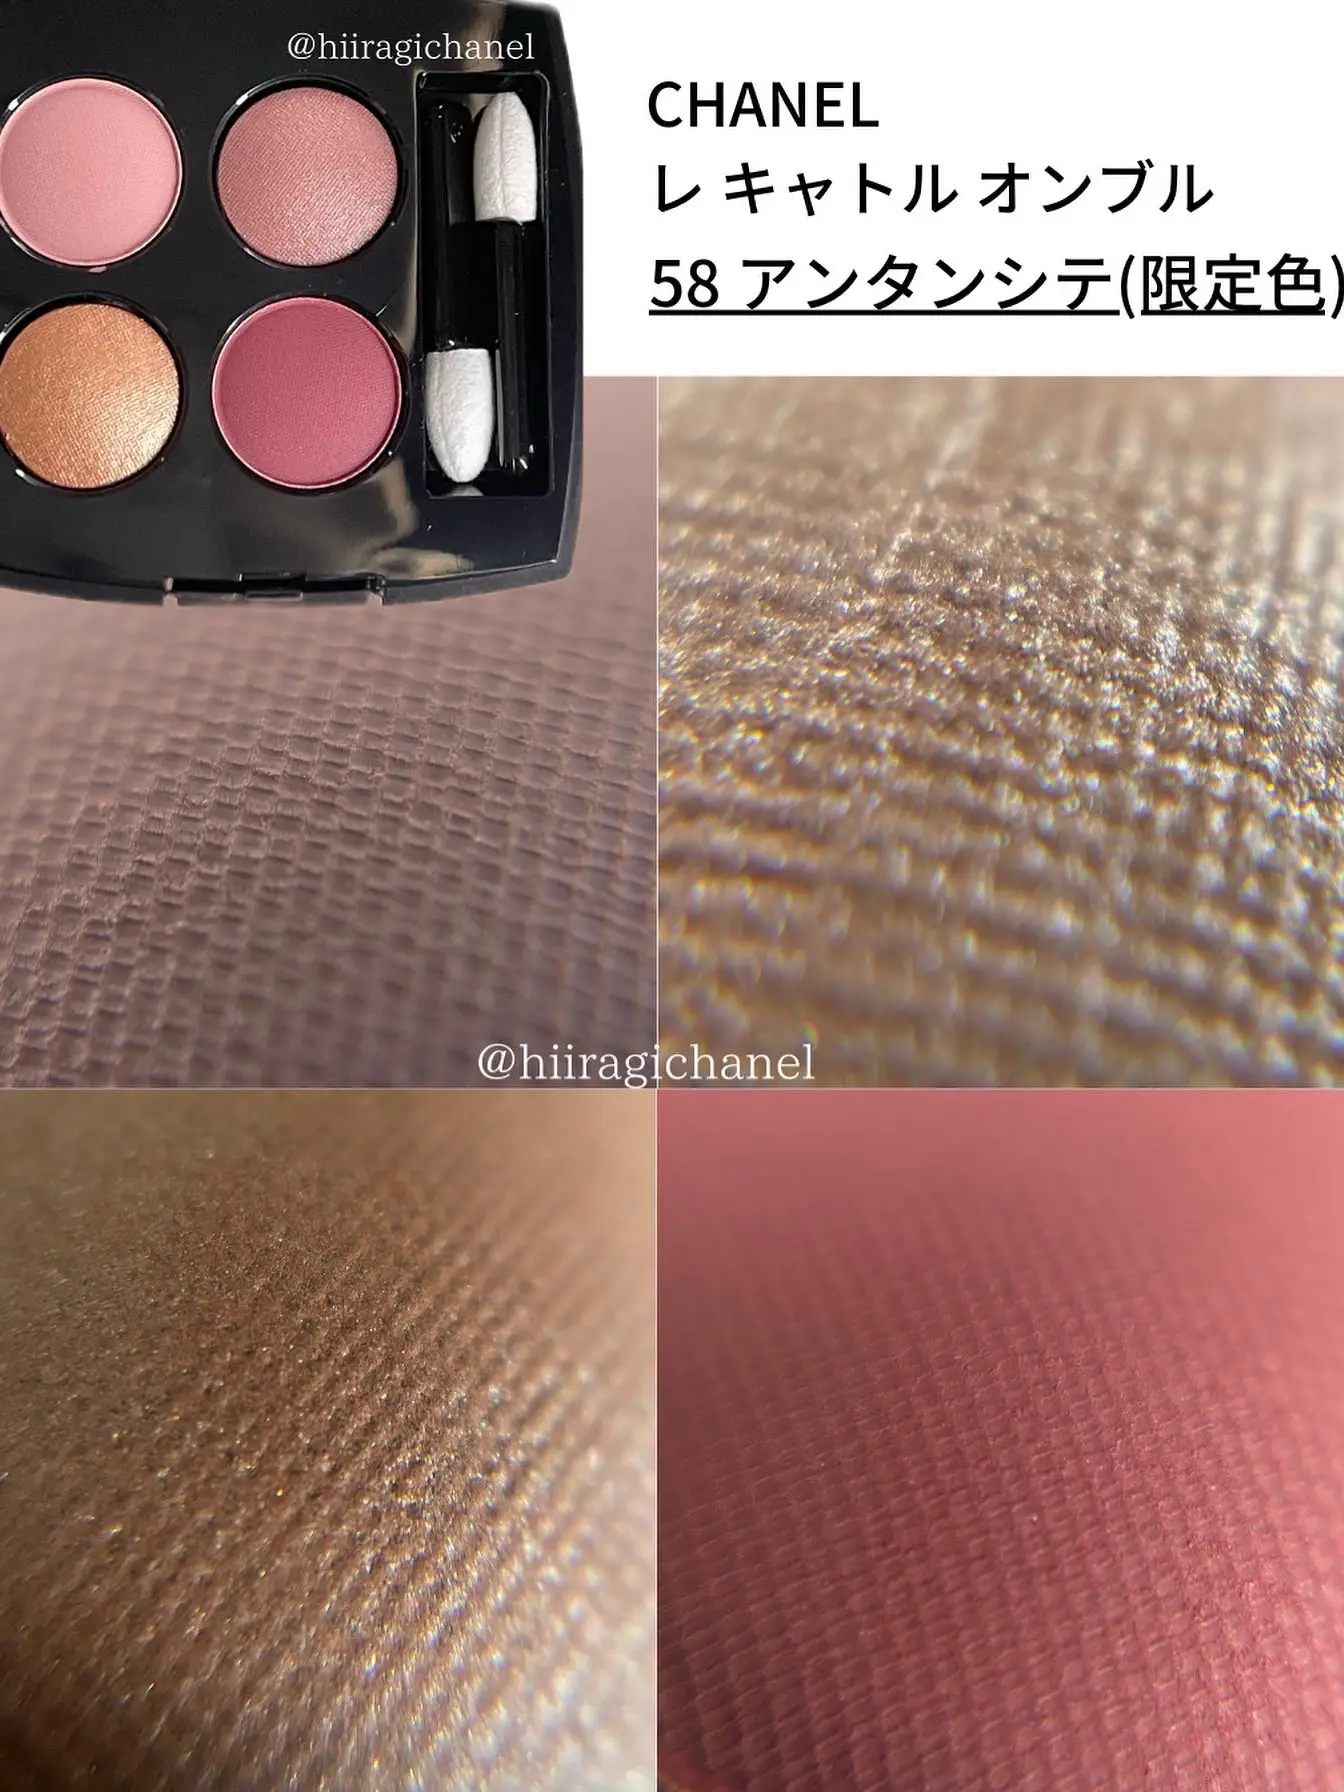 Autumn new cosmetics]\ I tried to paint CHANEL limited items /, Gallery  posted by ひいらぎ💄美容オタク